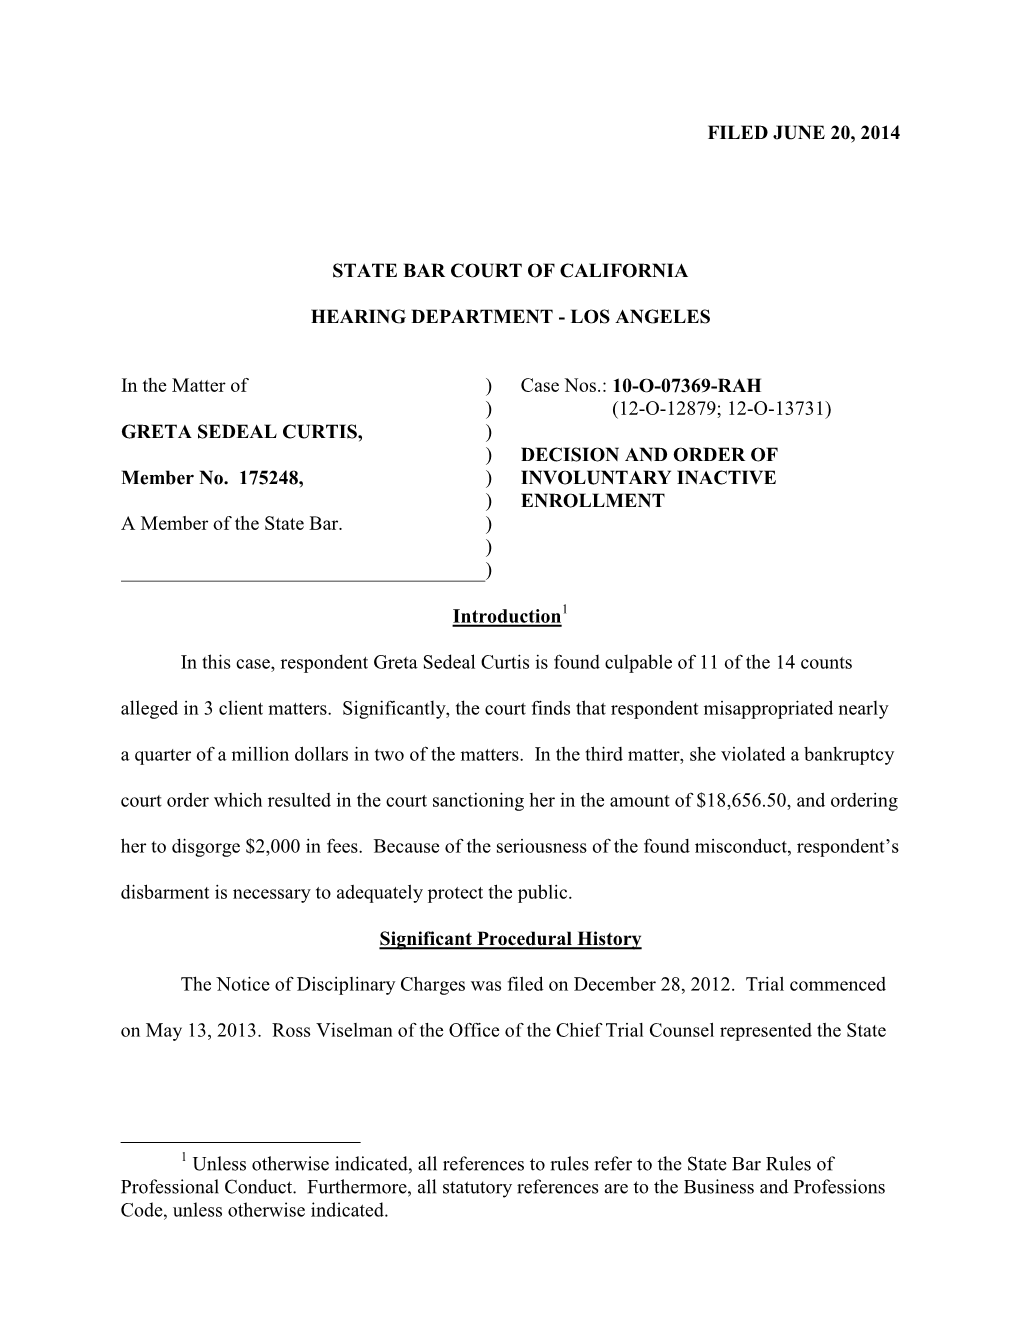 Filed June 20, 2014 State Bar Court of California Hearing